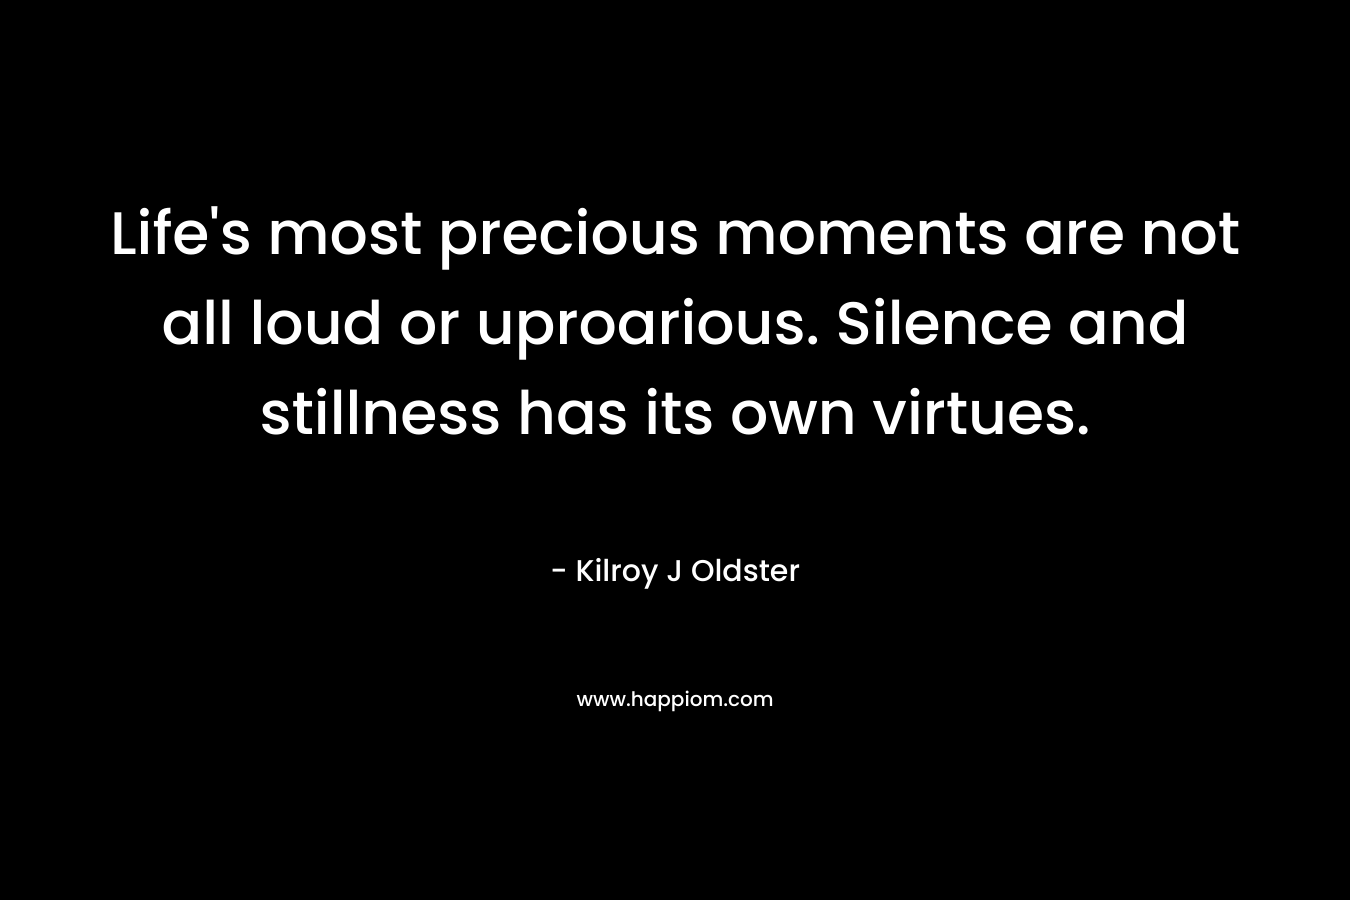 Life's most precious moments are not all loud or uproarious. Silence and stillness has its own virtues.